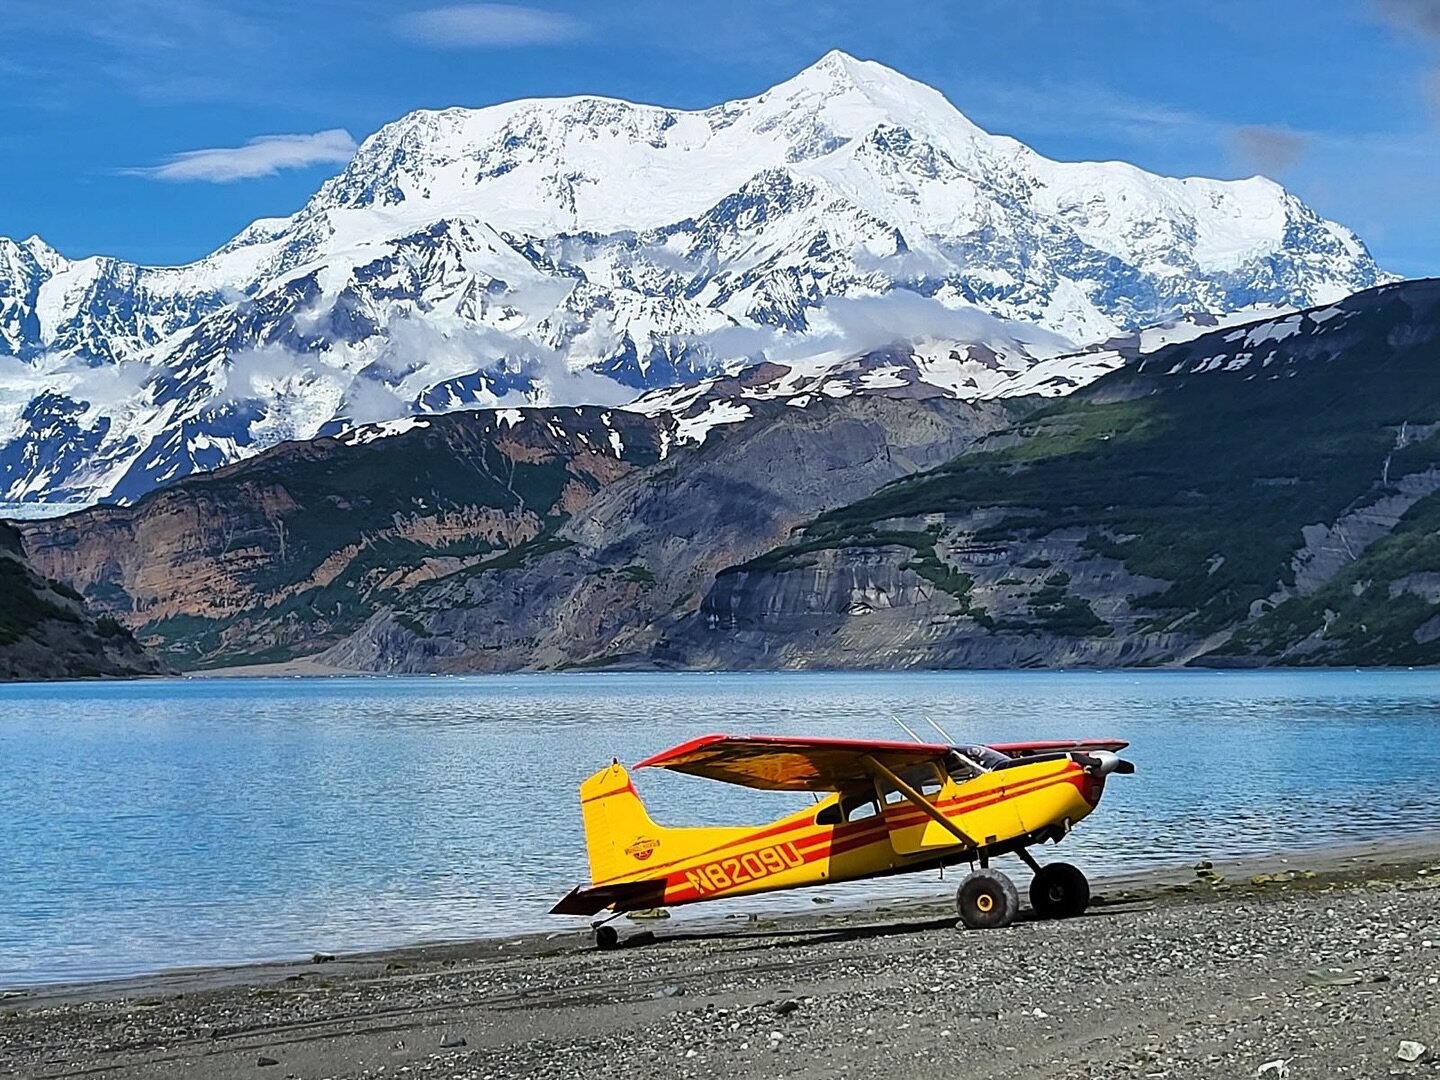 Of the 10 tallest mountains in the United States, 7 of them can be found in Wrangell St. Elias National Park! Come to McCarthy and roam in the land of giants! 

#youneedalaska #travel #travelalaska #alaskaphotography #alaska #bushplane #wrangellsteli